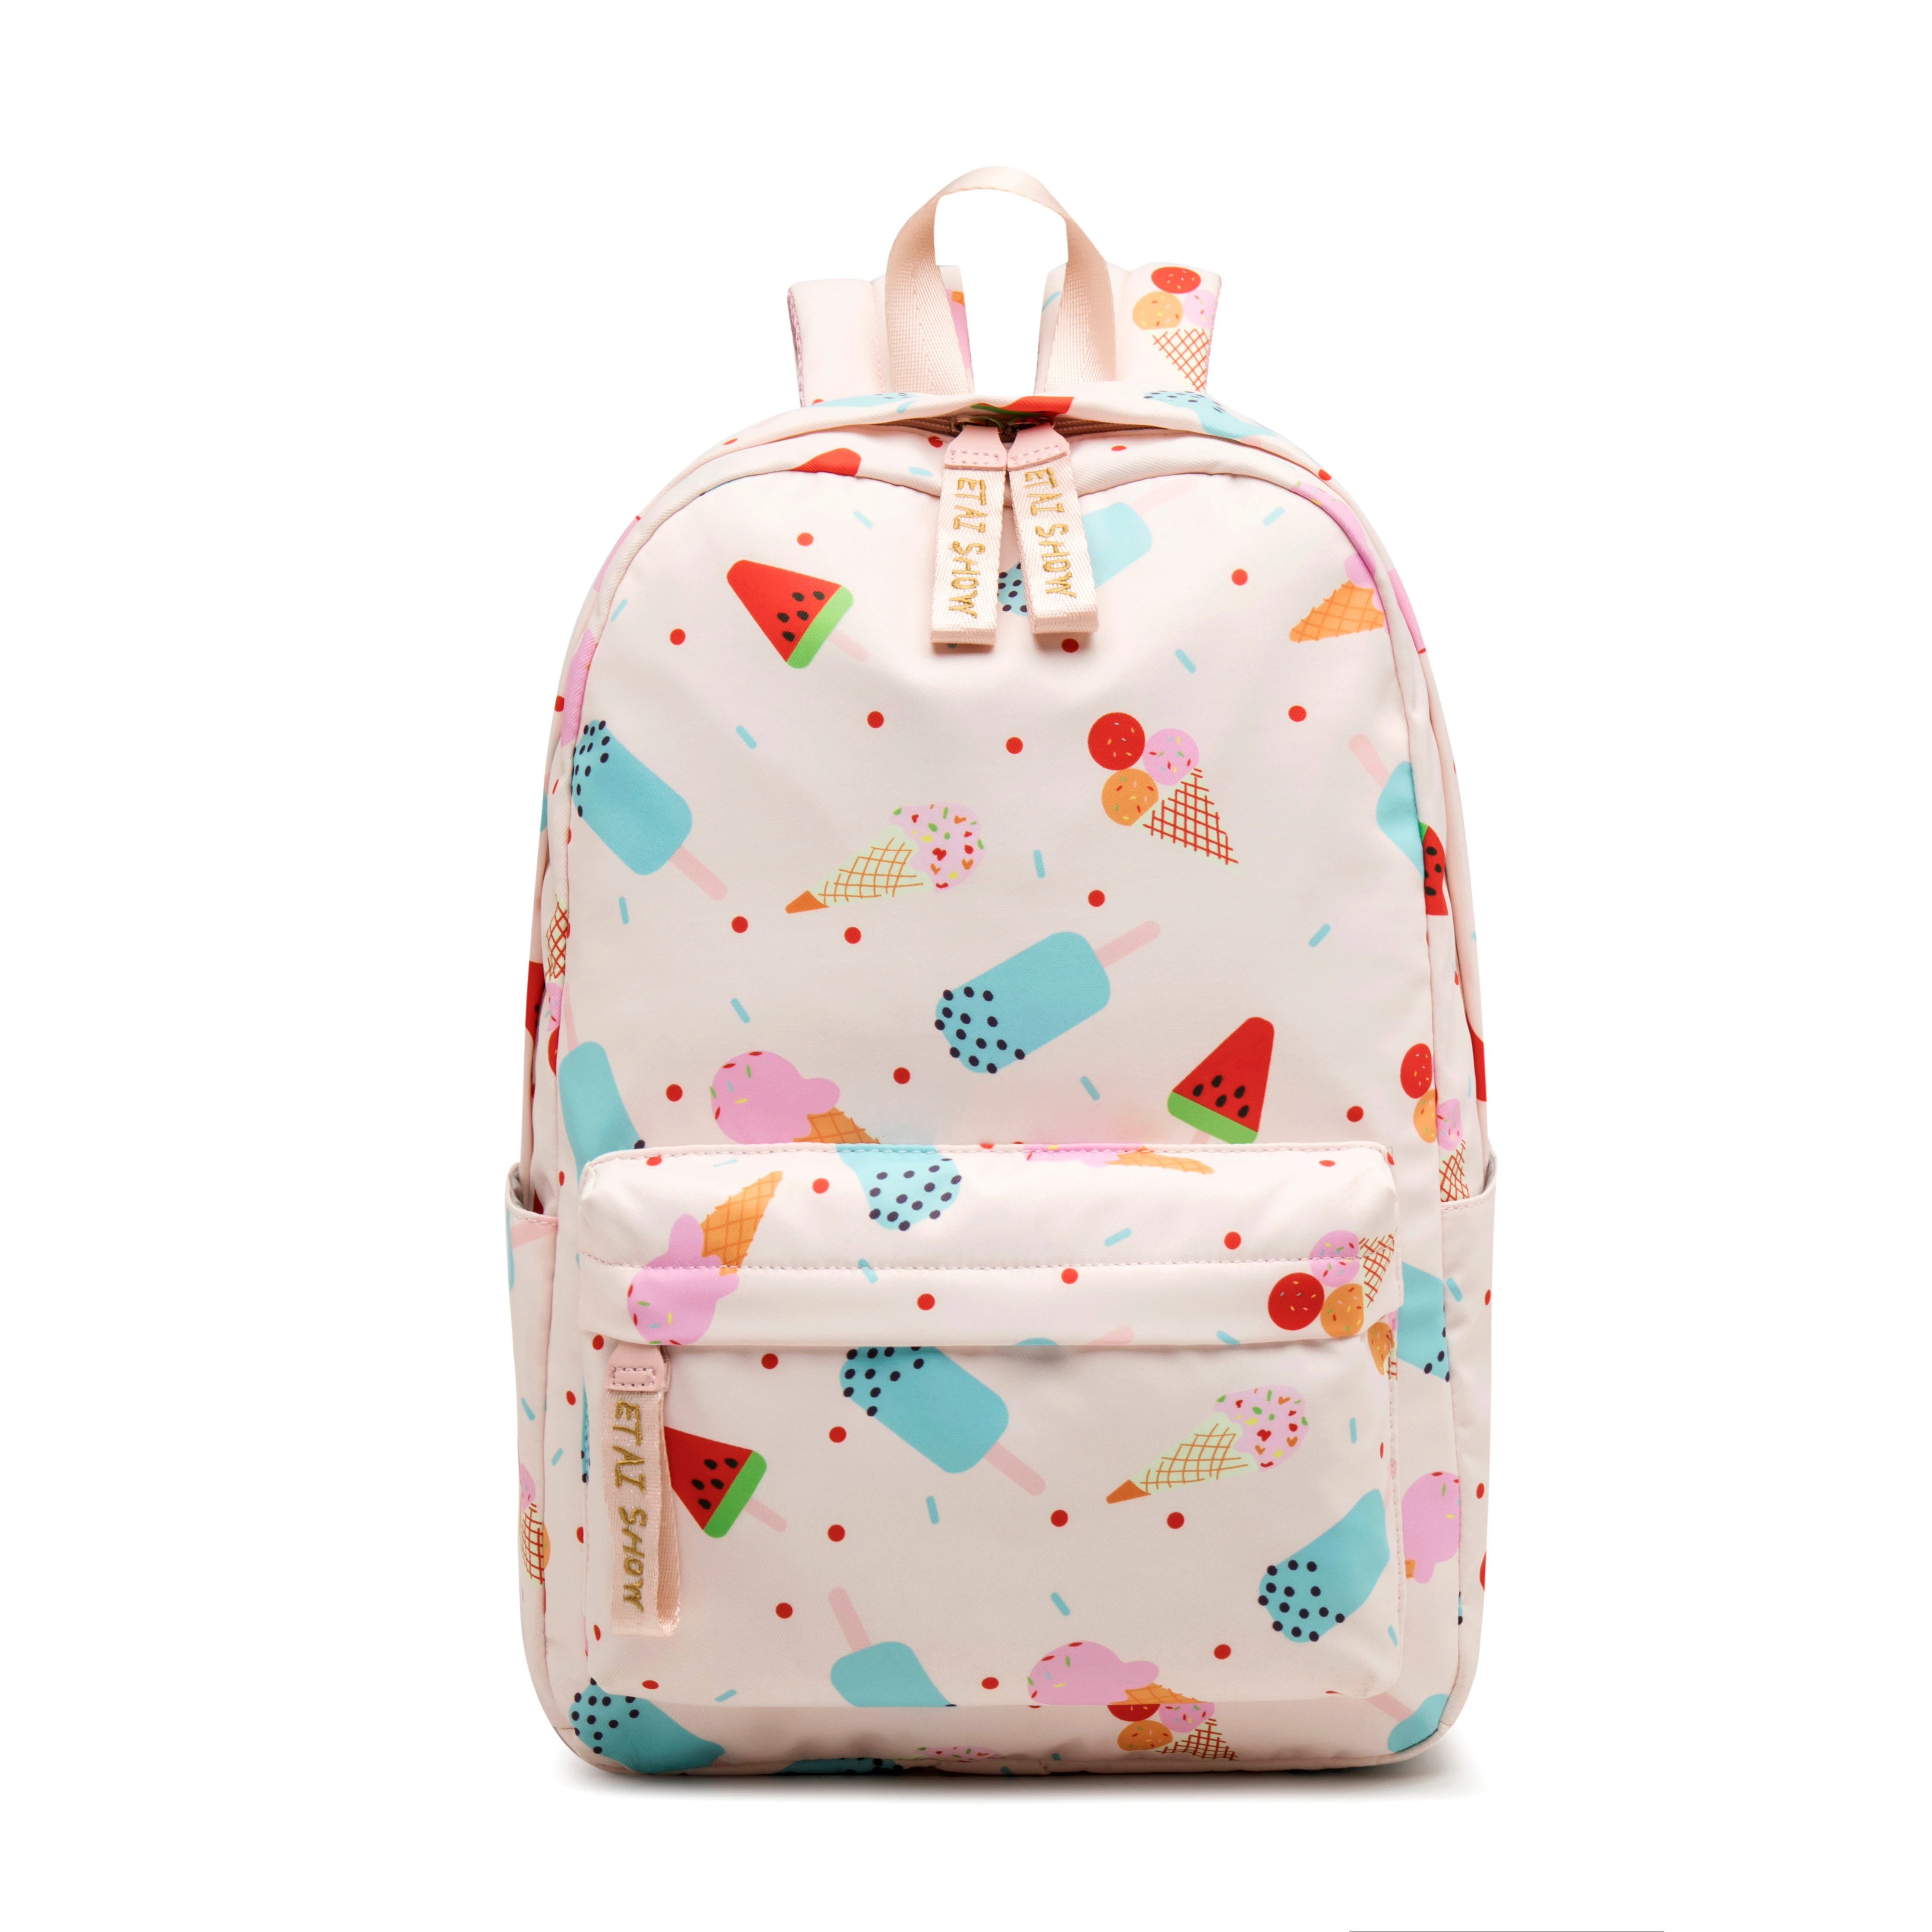 

Fashion campus bag teenage girls cute Ice cream pattern laptop school bags large capacity bagpack computer backpack, Gradient colours